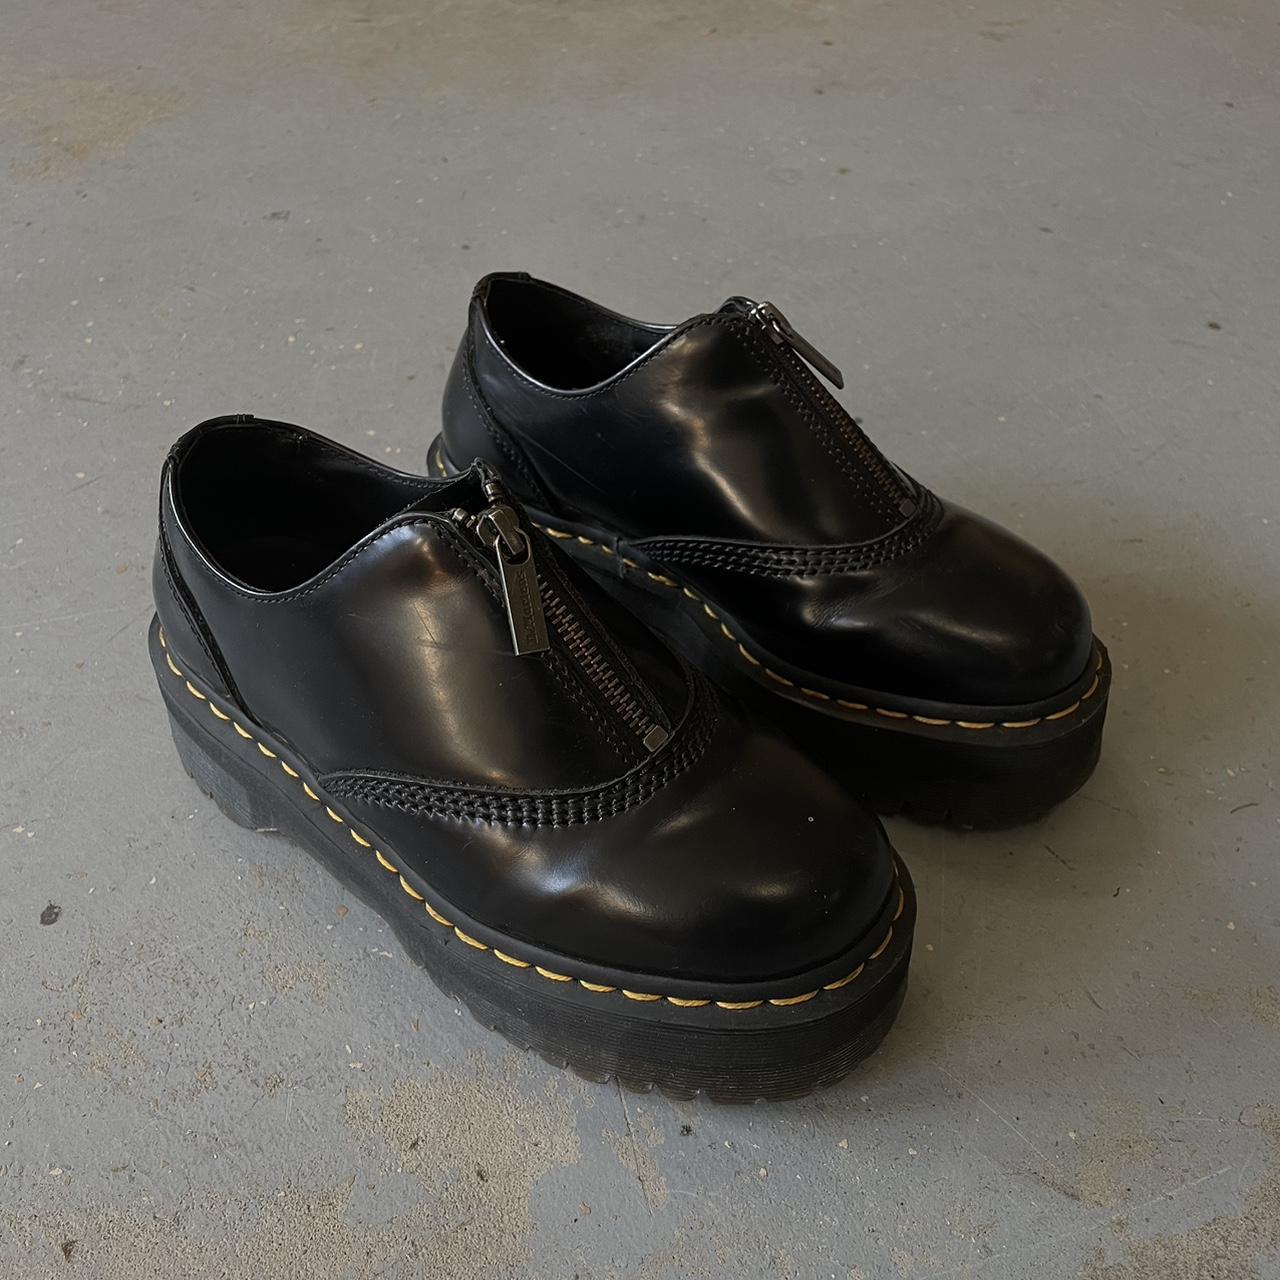 ⭐️Dr. Martens Aurian II Quad⭐️ discontinued and gently... - Depop